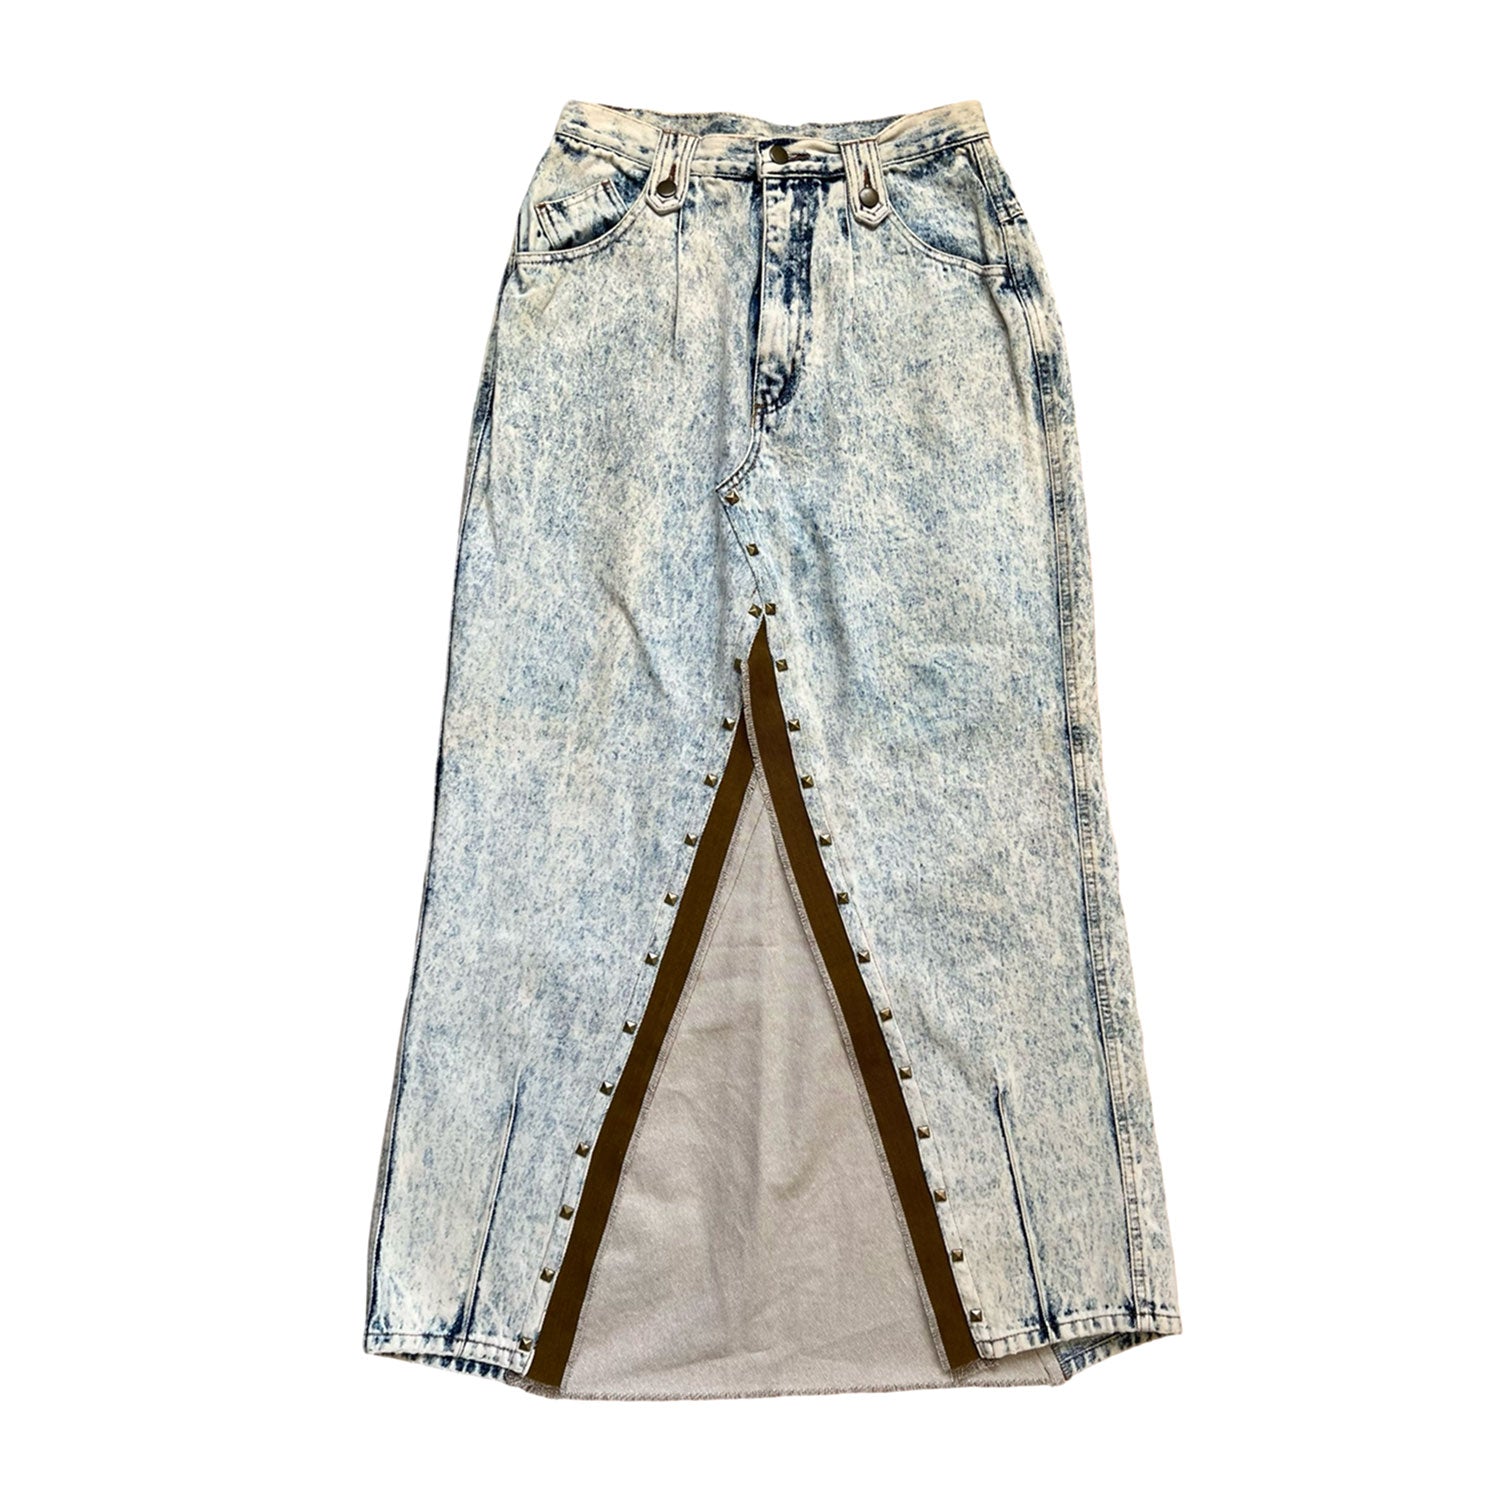 Denim Skirt in Acid-Washed Blue and Brown